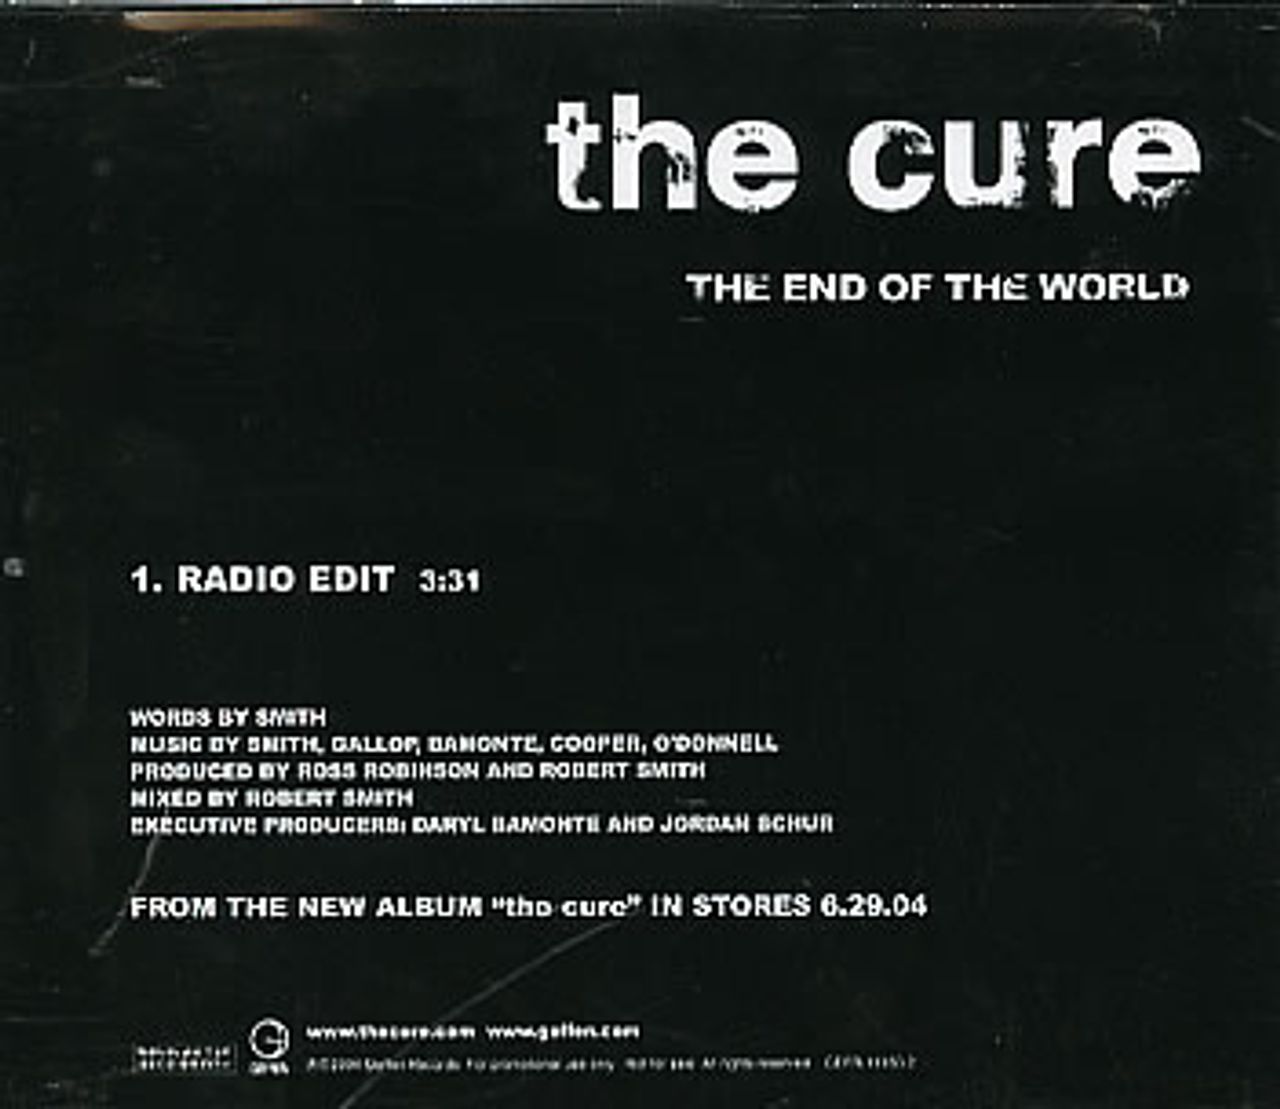 The Cure The End Of The World US Promo CD single — RareVinyl.com